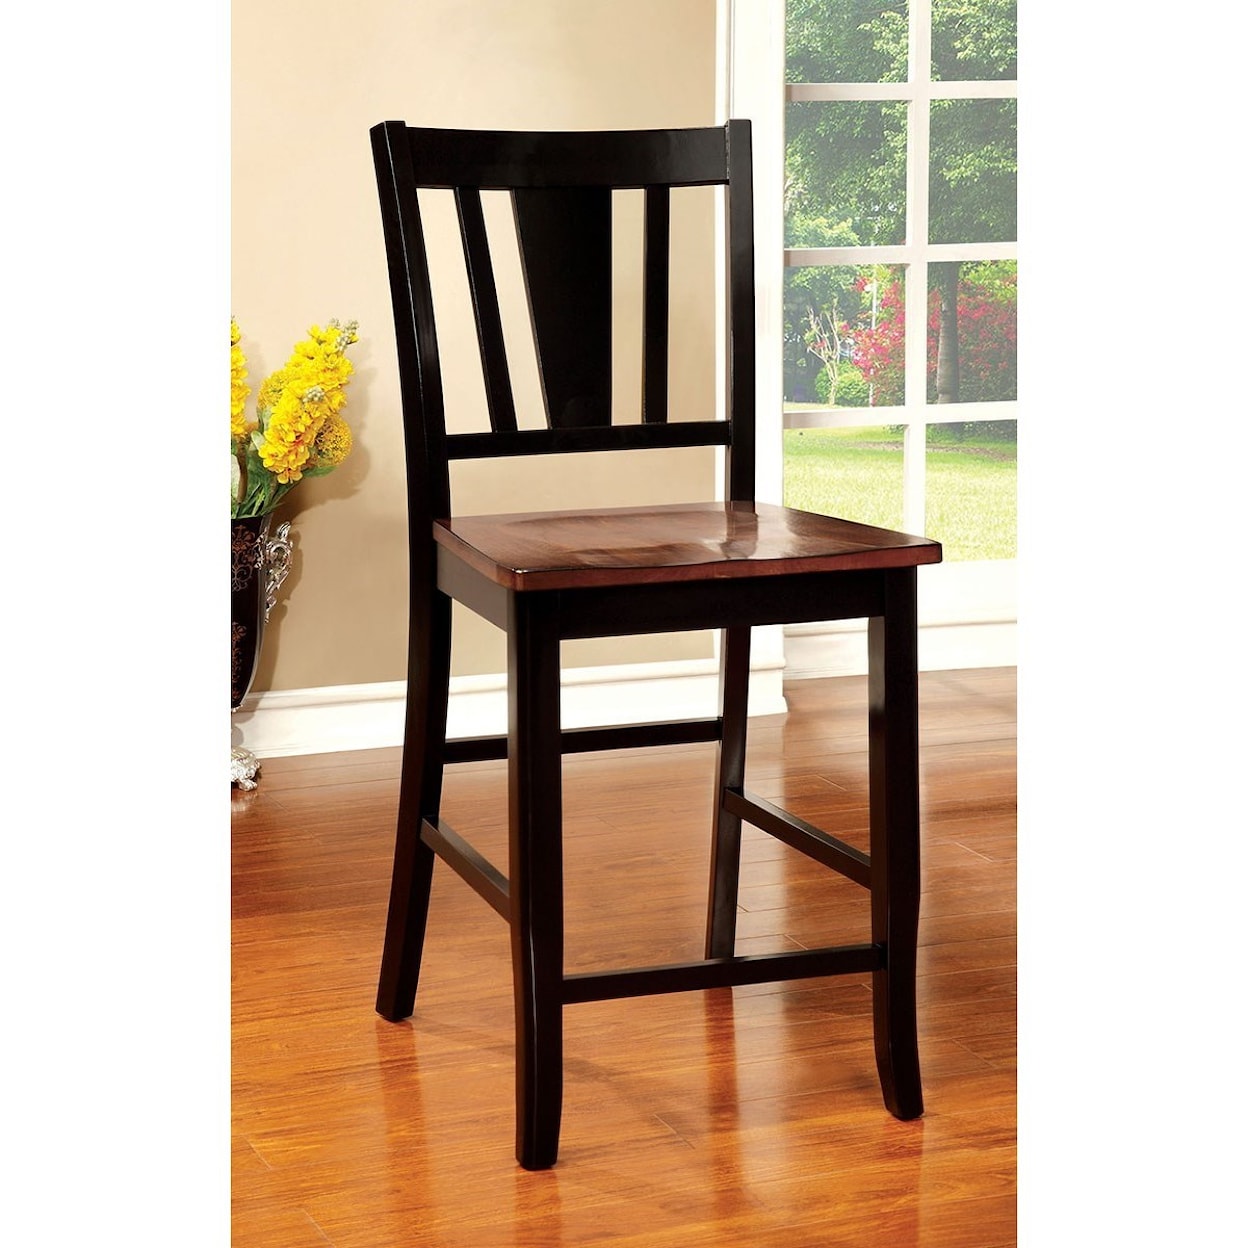 Furniture of America Dover II Counter Height Chair